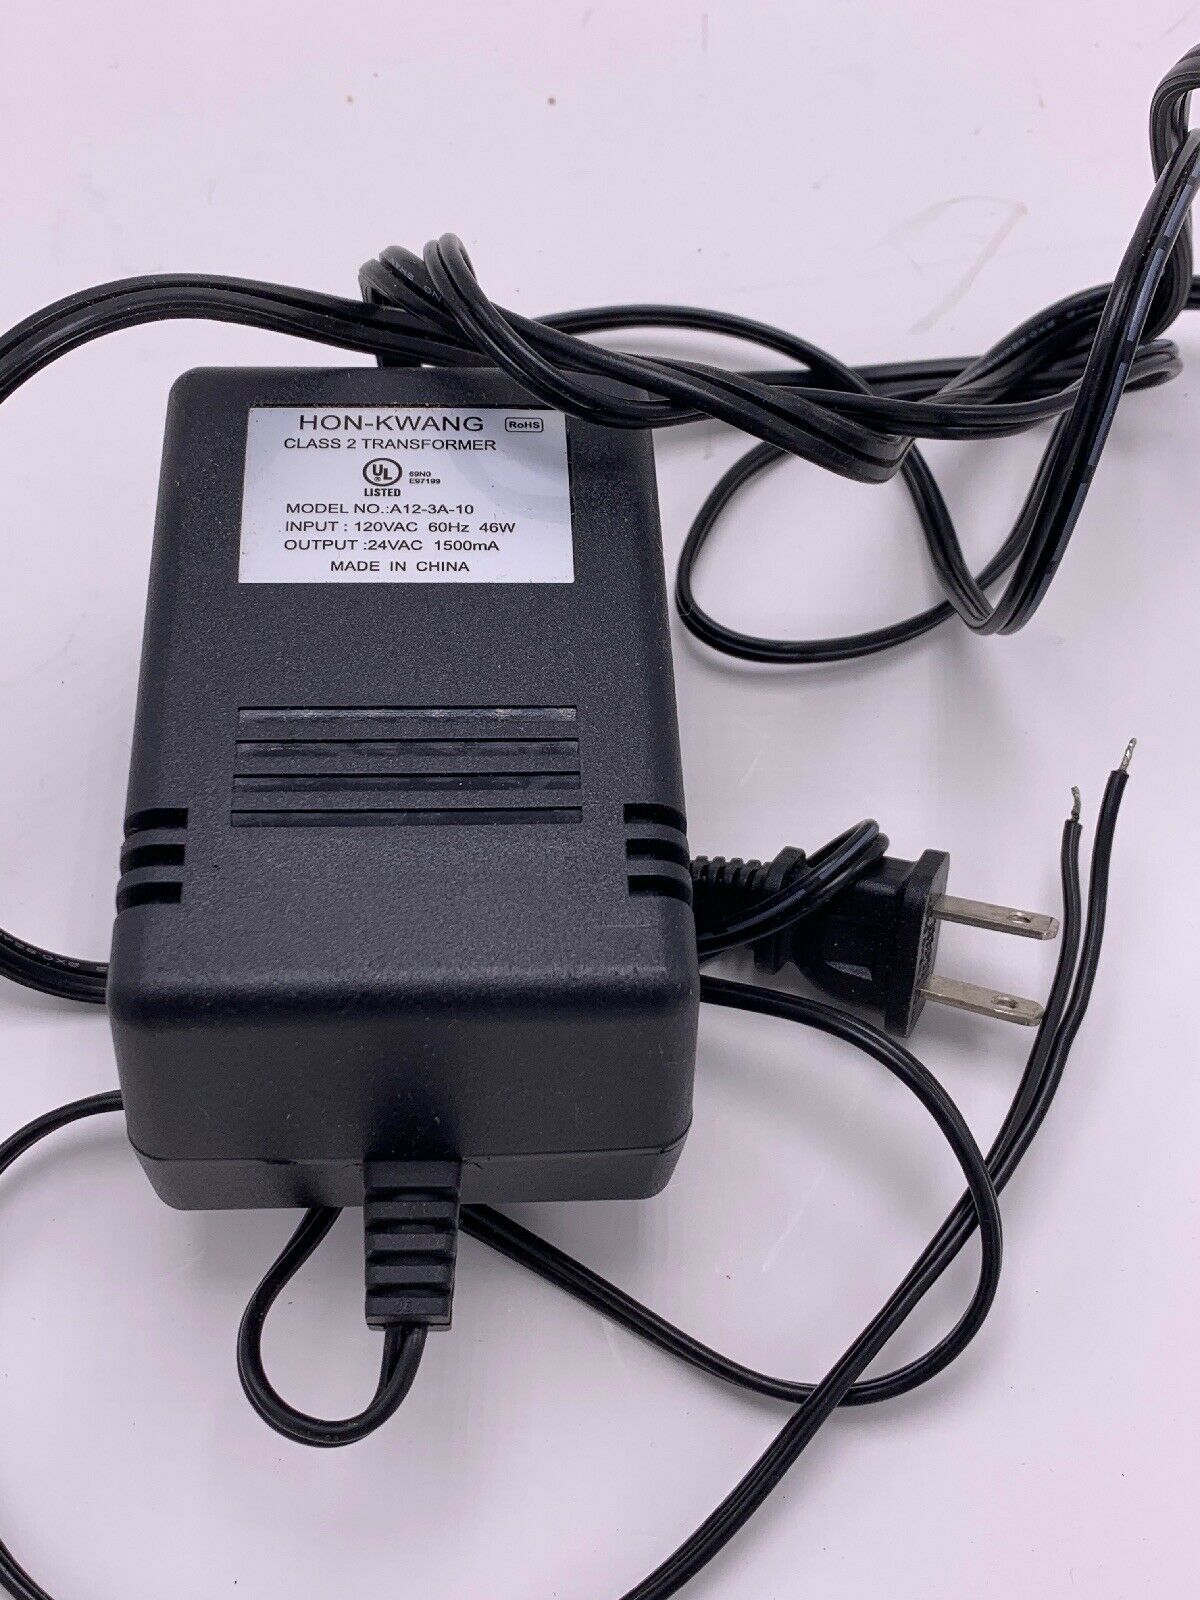 NEW 24V AC 1500ma Hon-Kwang A12-3A-10 Plug In Class 2 Transformer ac adapter - Click Image to Close